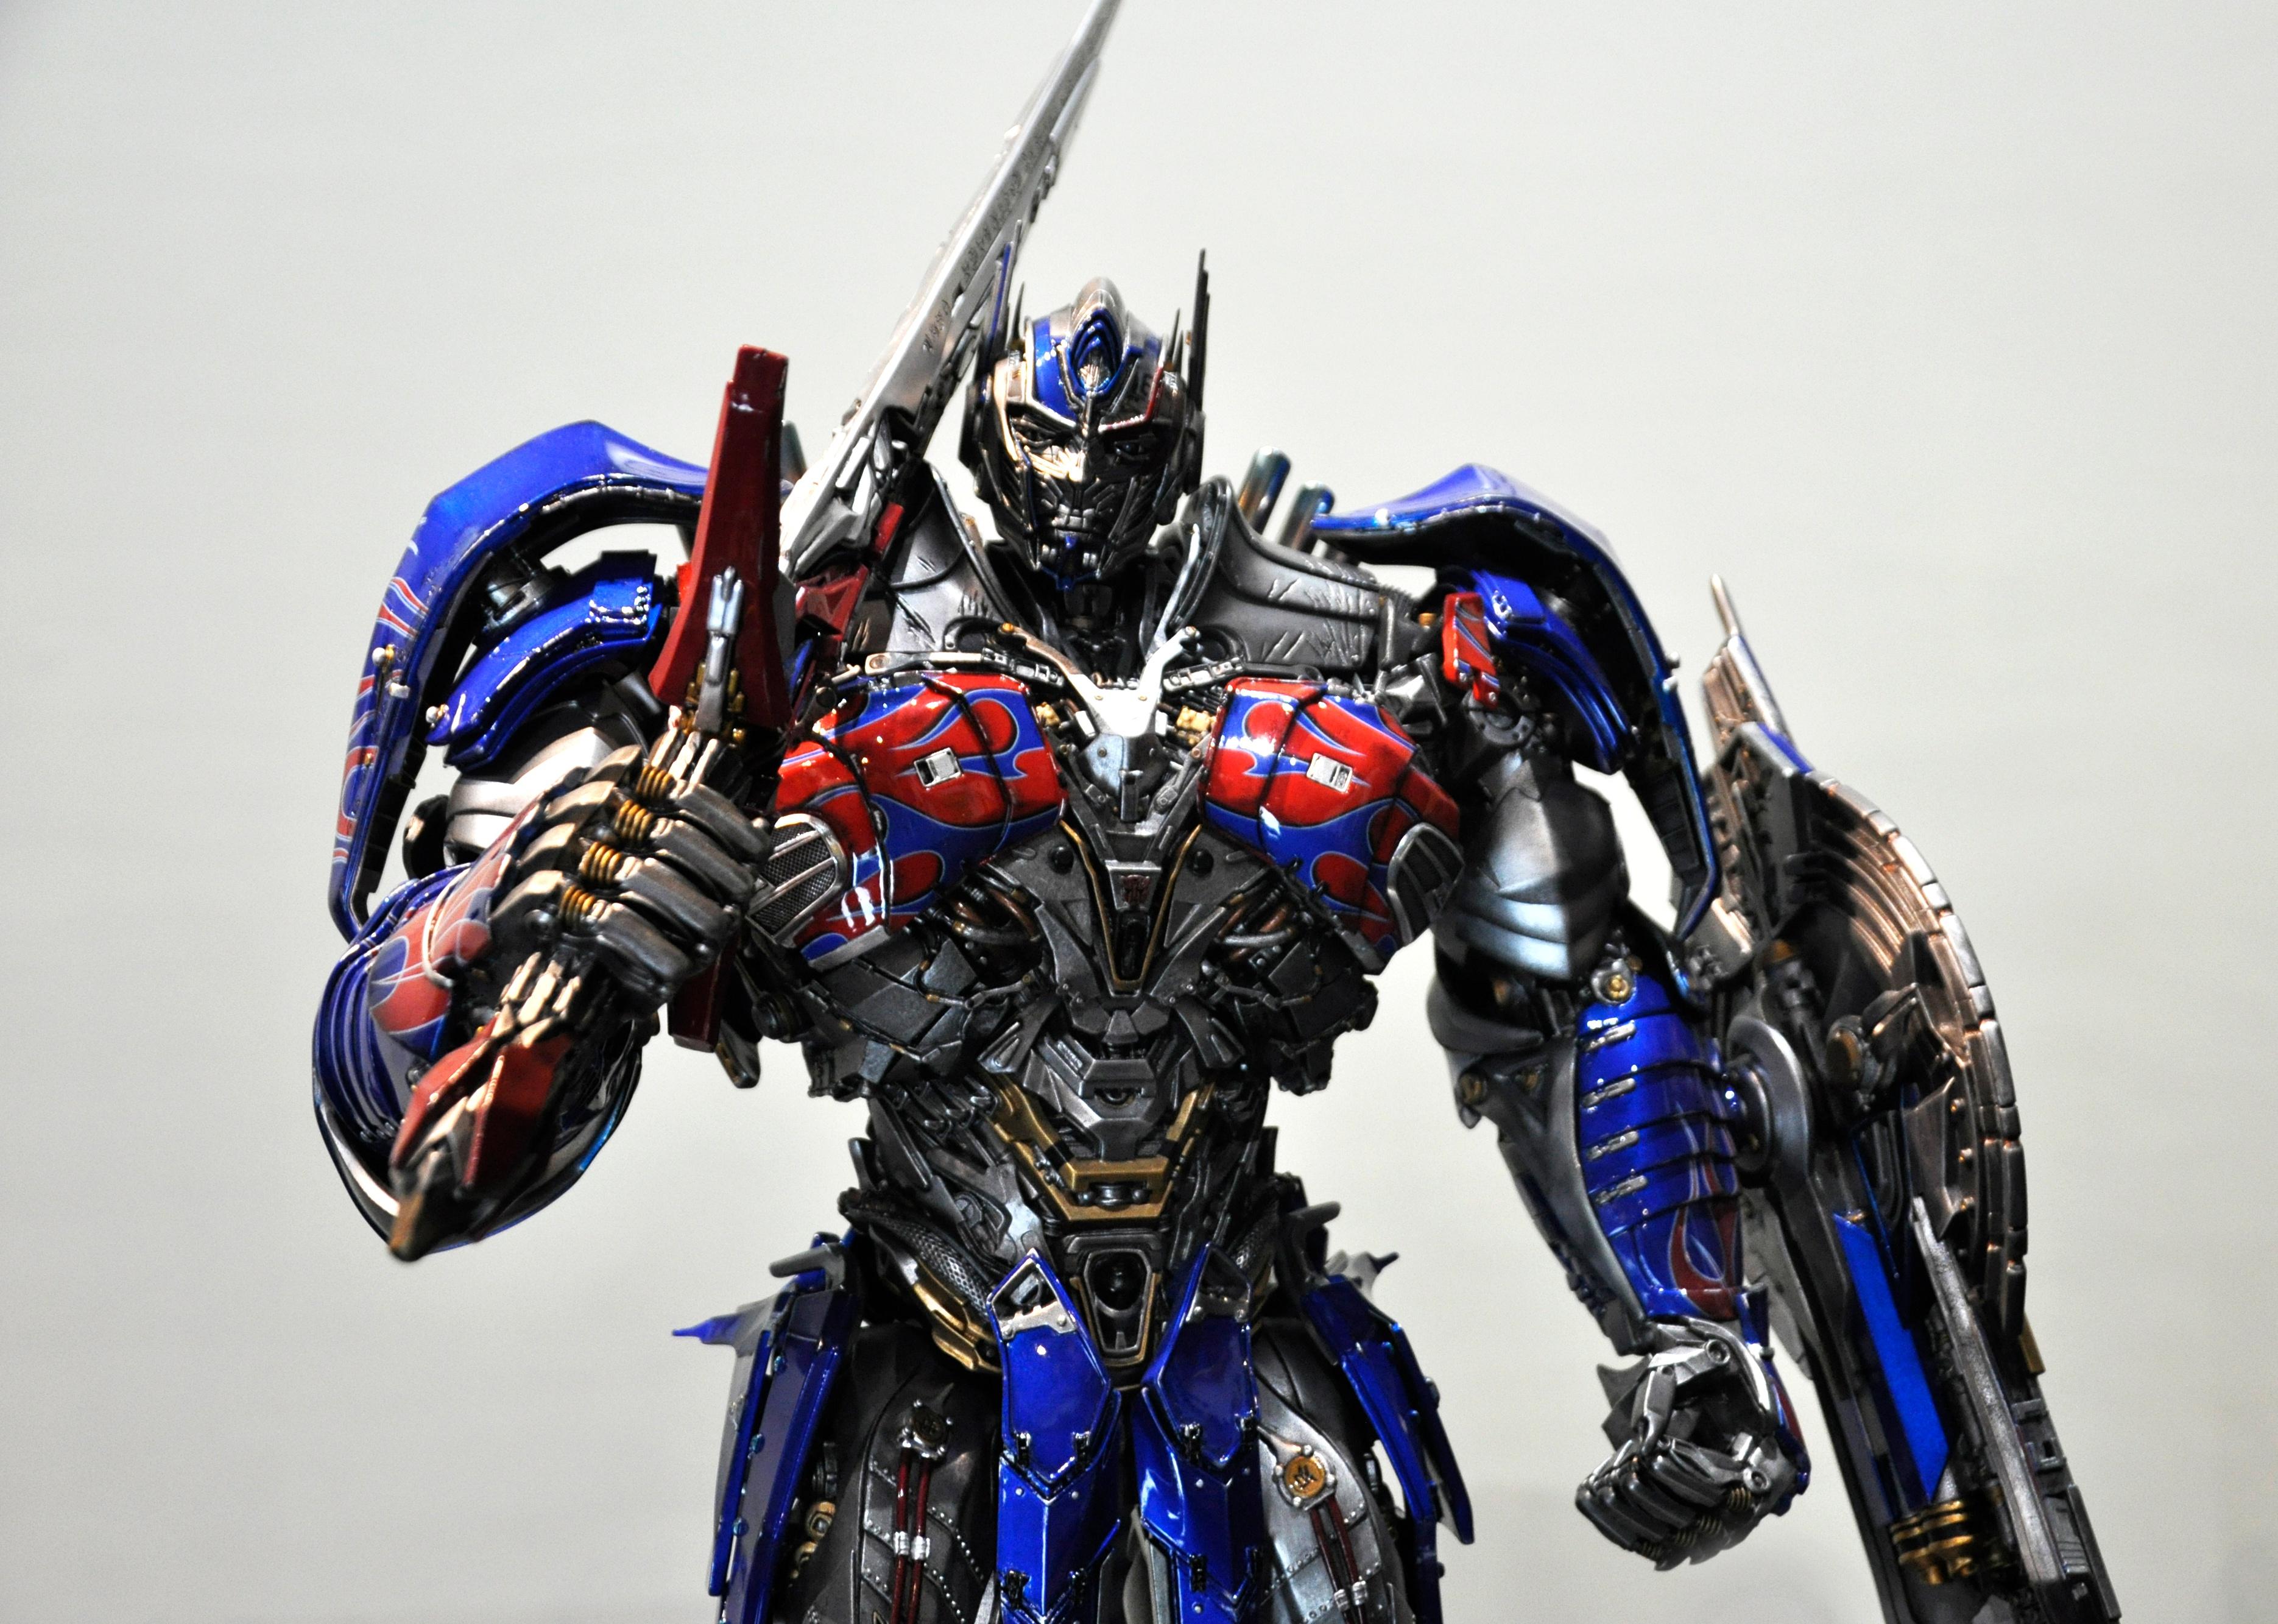 Optimus Prime action figure in the Transformers franchise.